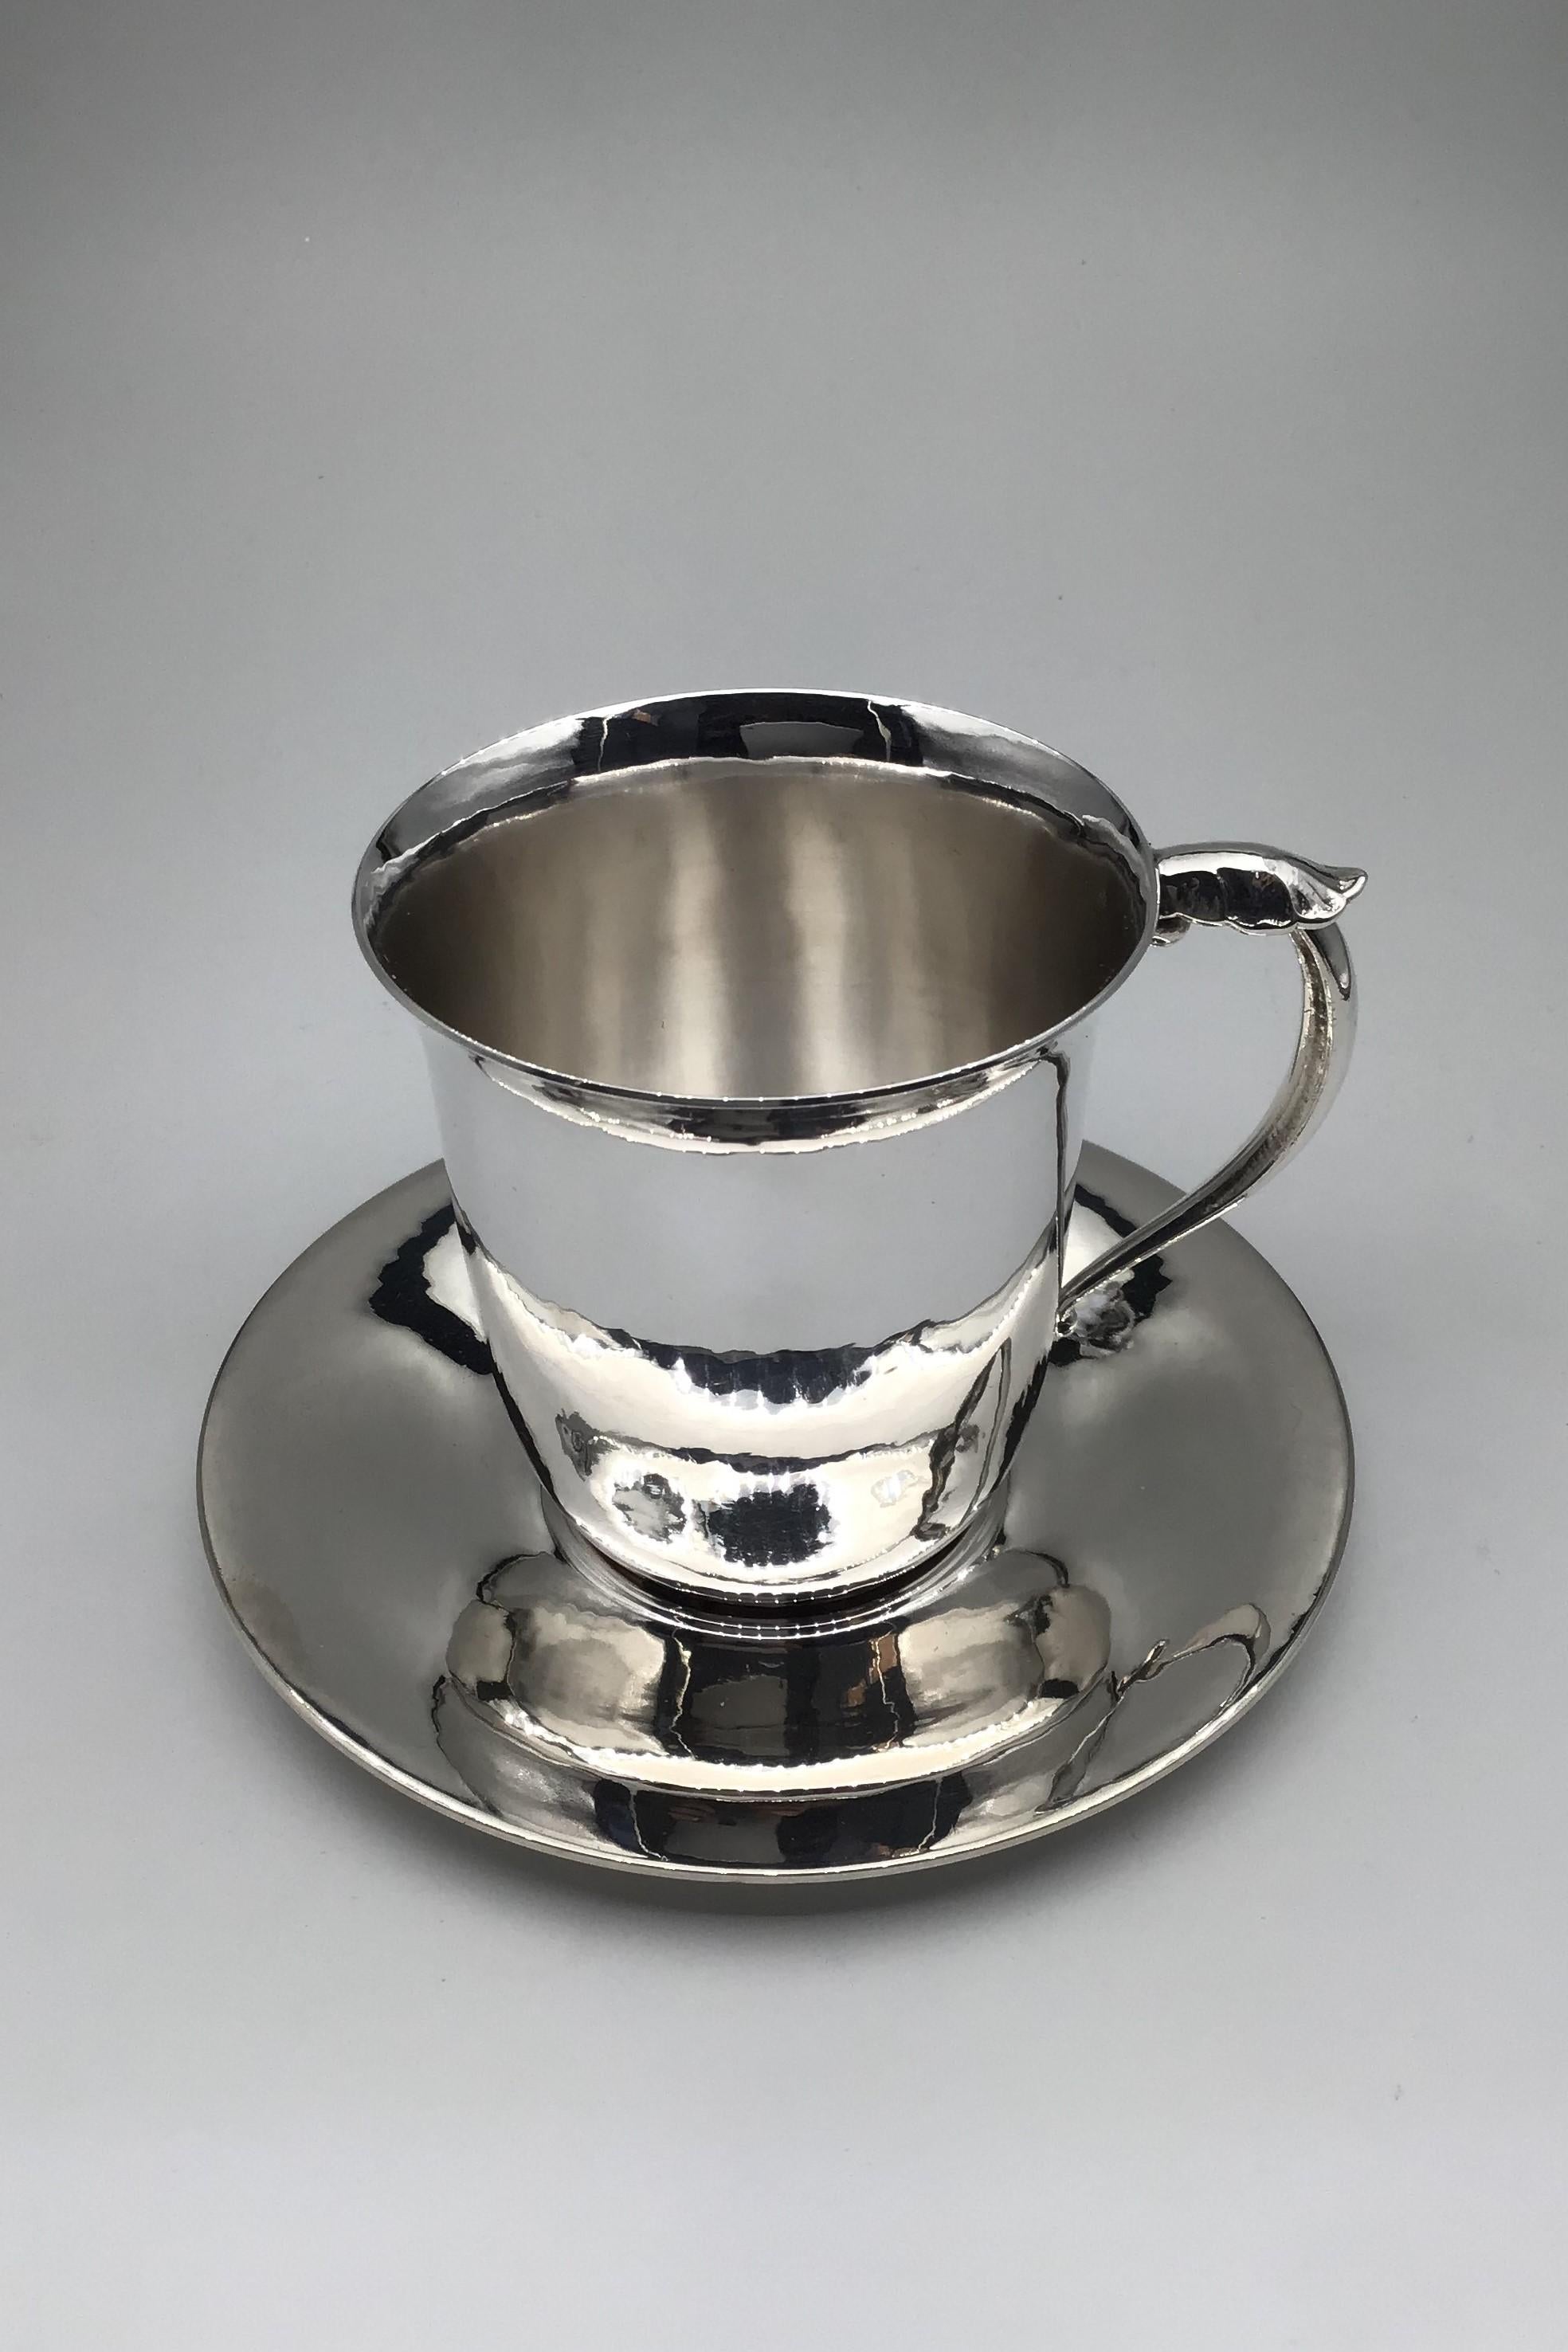 
Georg Jensen Sterling Silver Cup/saucer No 444B/444

Cup Measures Diam 7 cm (2.75 inch) H 7.2 cm (2.83 inch) Weight 107.6 gr/ 3.80 oz. Post 1945
Saucer Measures Diam 11.7cm (4.6 inch) Weight 74 gram / 2.45 oz. 1933-1944